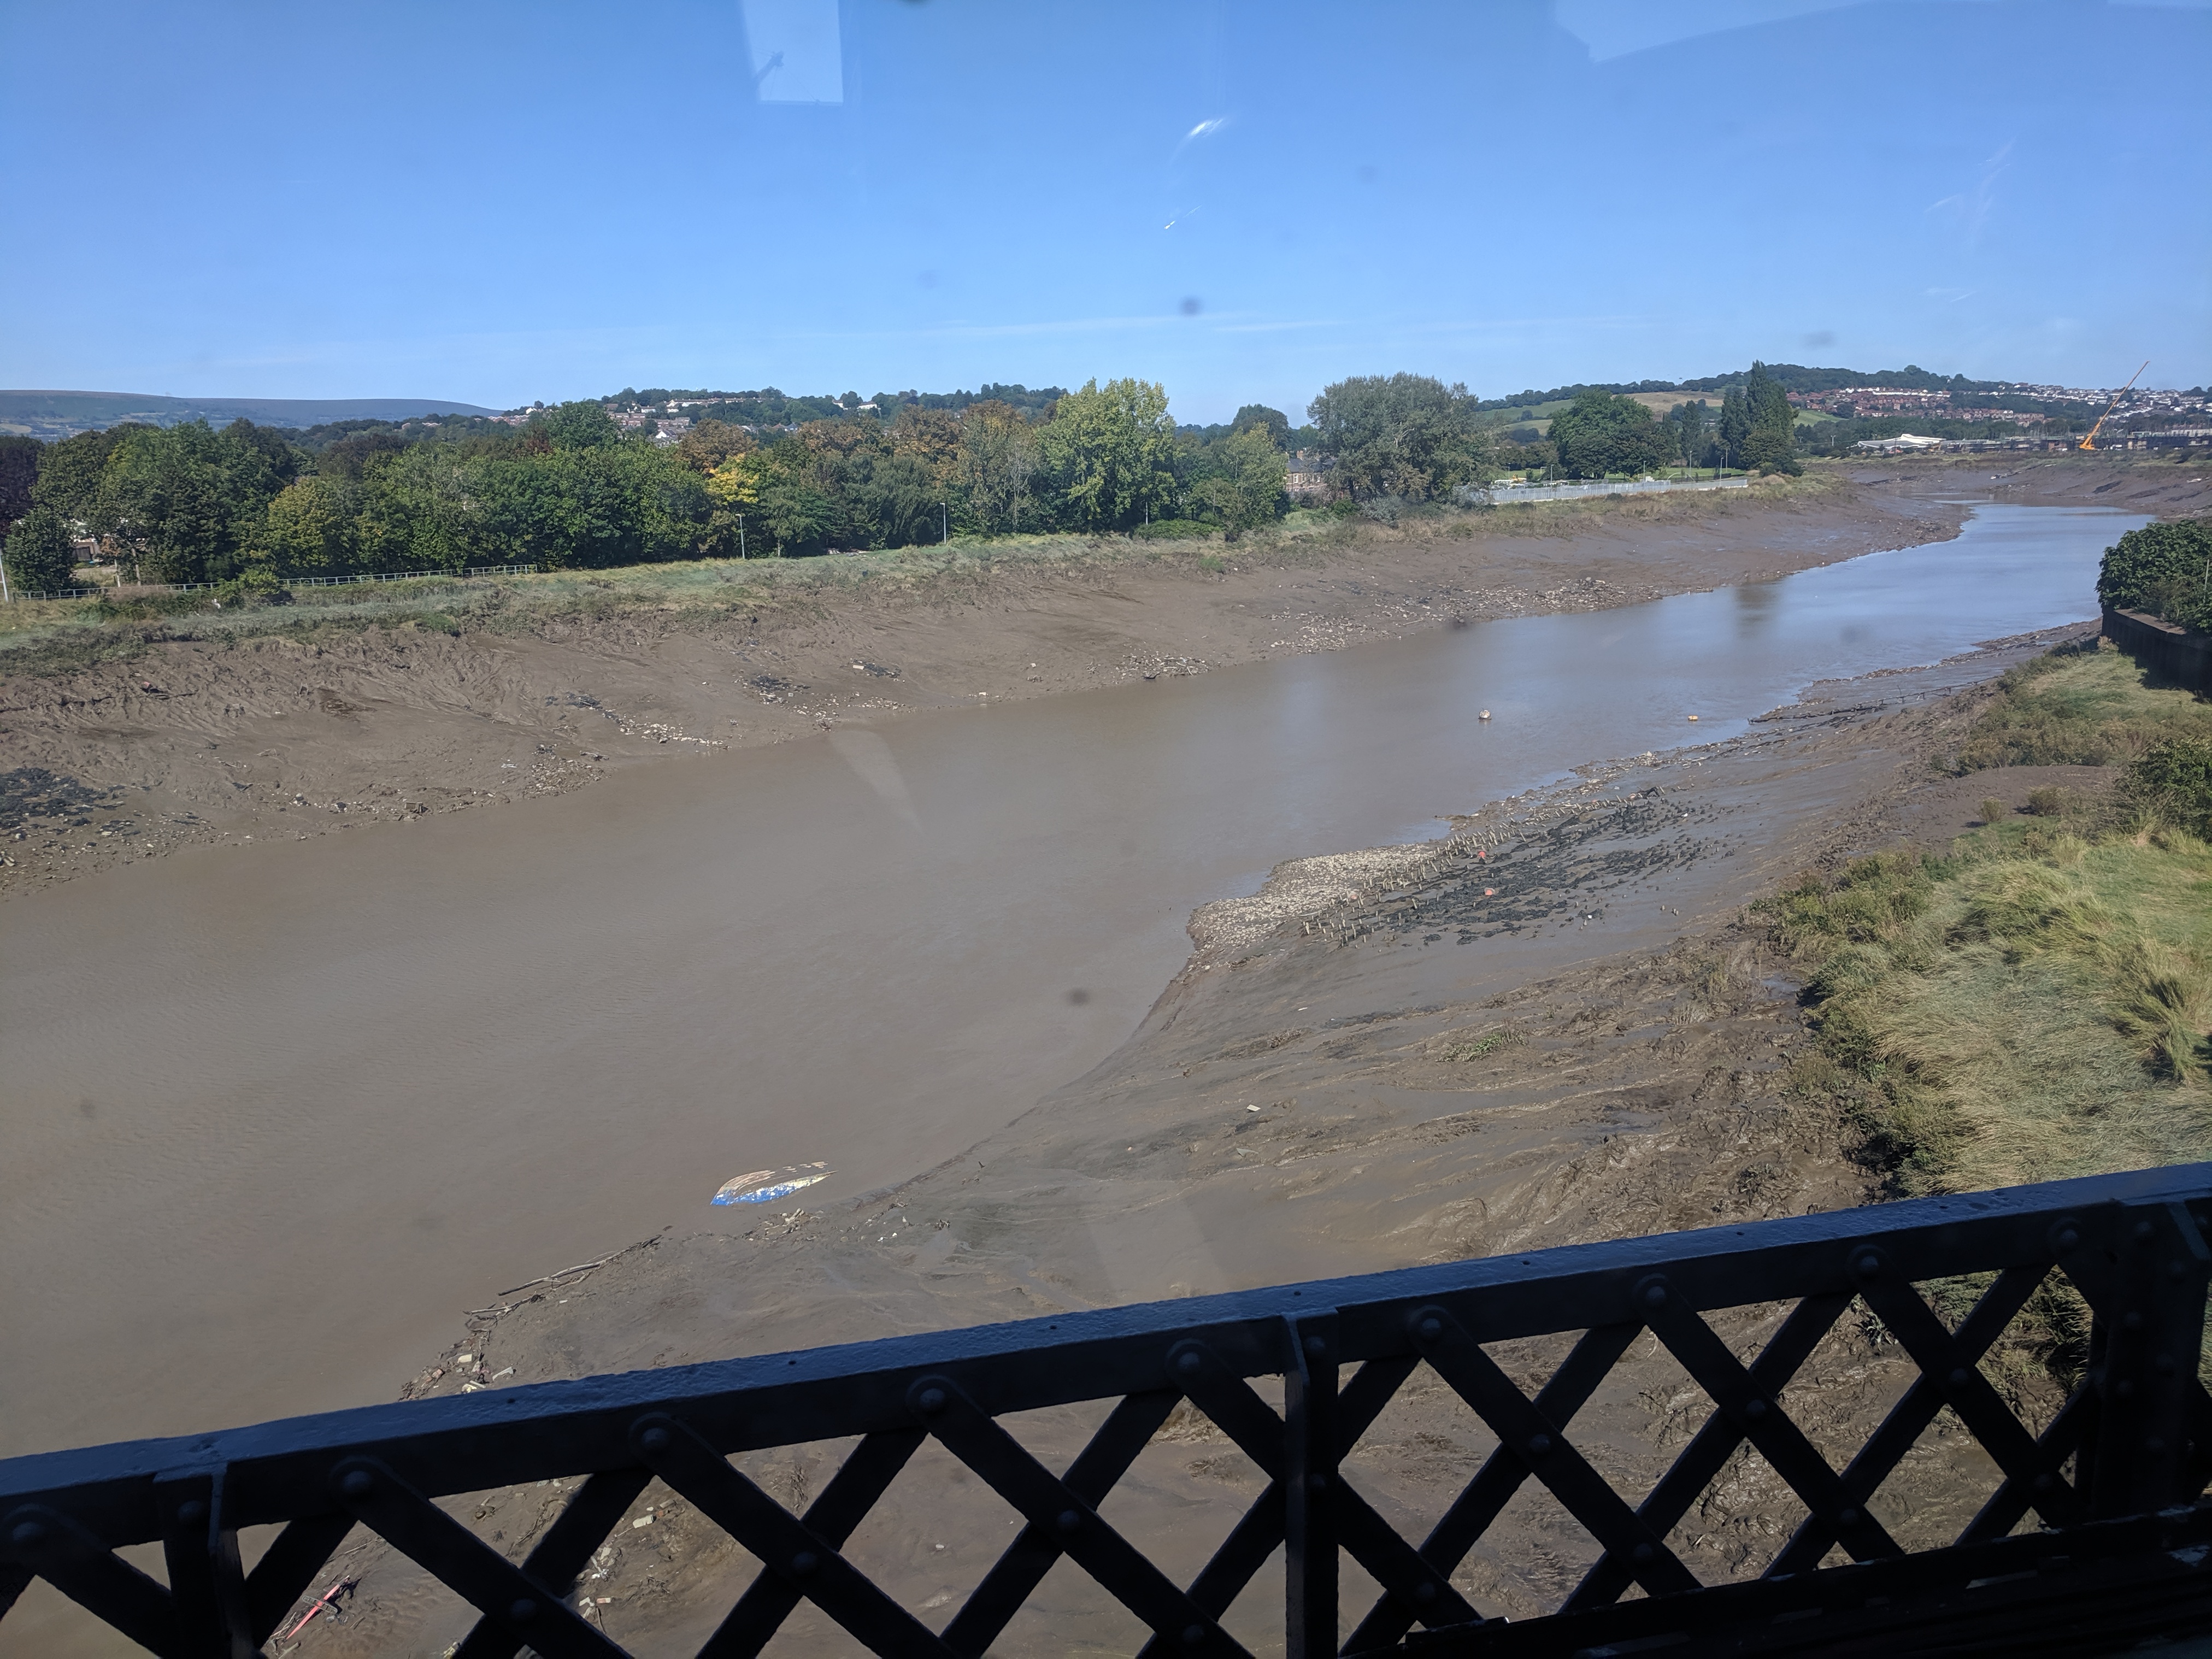 View out of a train window looking over a very muddy Severn River